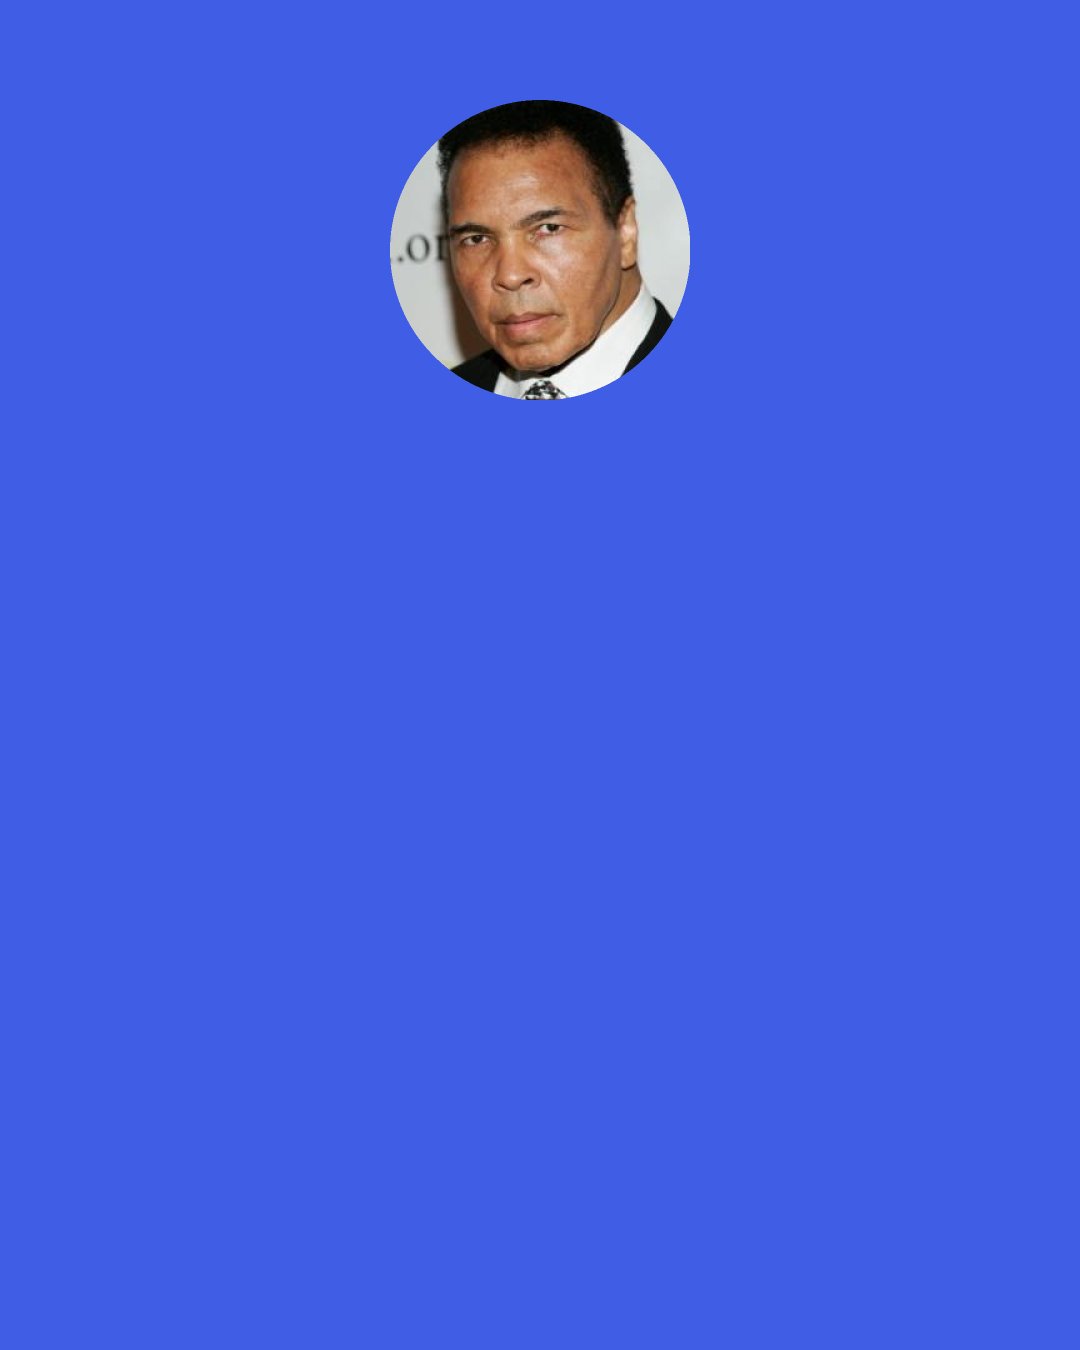 Muhammad Ali: I got nothing against no Viet Cong. No Vietnamese ever called me a >.